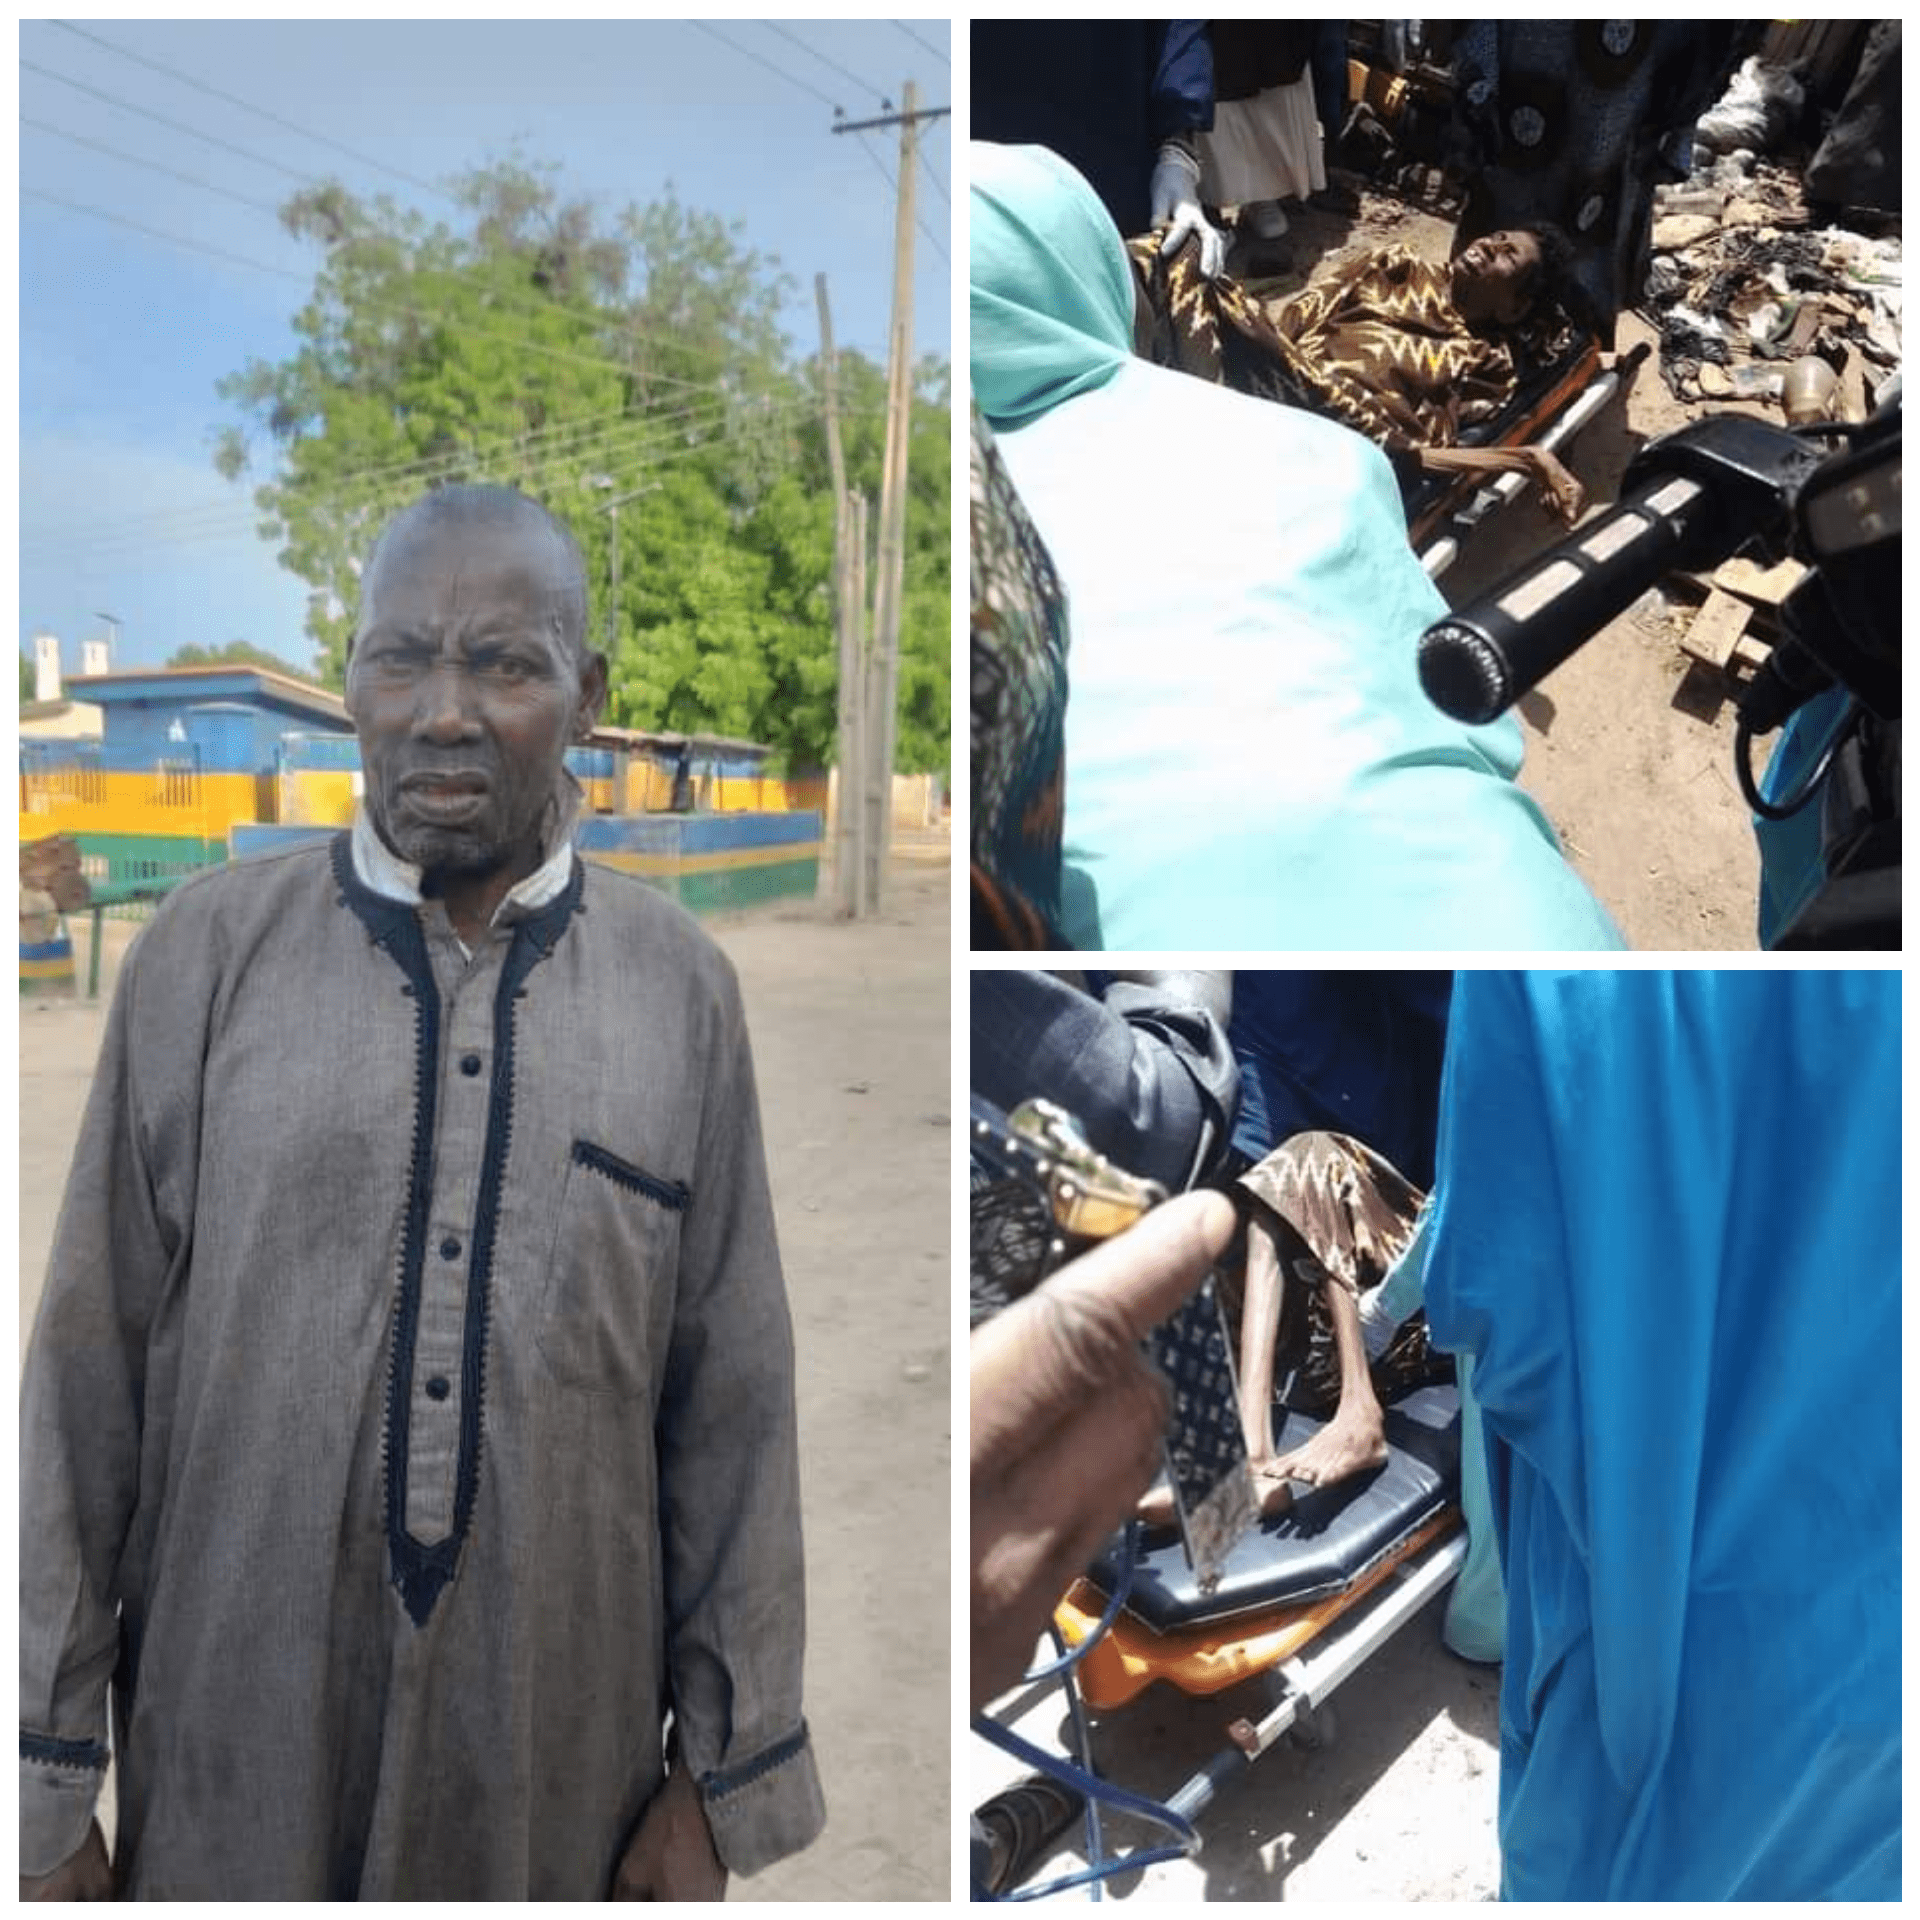 Shocking: Man Arrested for Locking Up, Dehumanising and Starving Wife For 2 Years in Borno (PHOTOS)